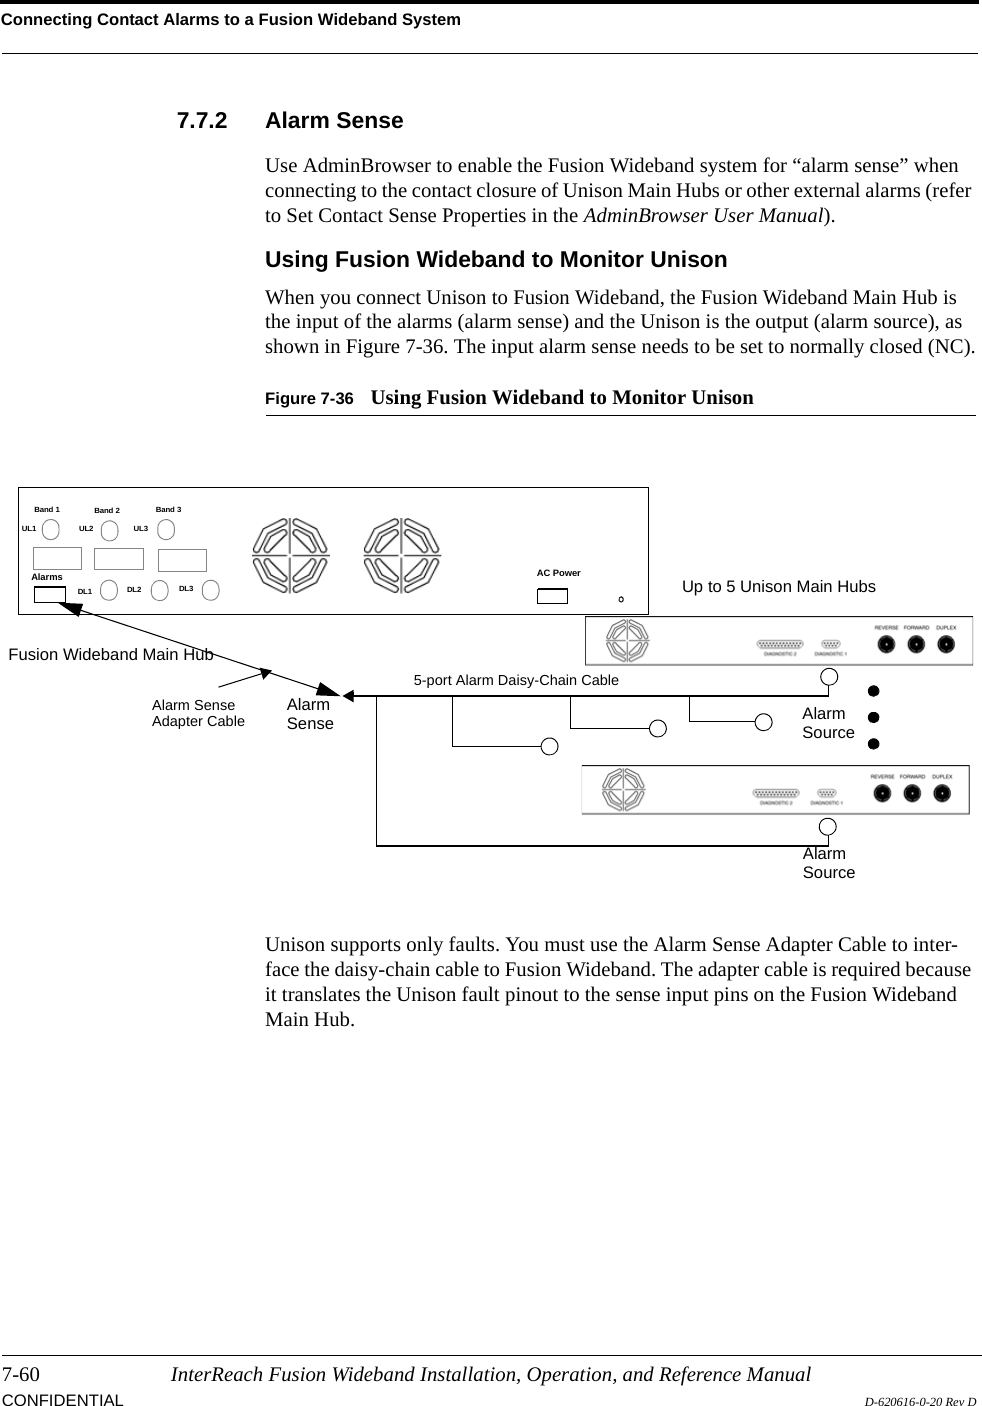 Connecting Contact Alarms to a Fusion Wideband System7-60 InterReach Fusion Wideband Installation, Operation, and Reference ManualCONFIDENTIAL D-620616-0-20 Rev D7.7.2 Alarm SenseUse AdminBrowser to enable the Fusion Wideband system for “alarm sense” when connecting to the contact closure of Unison Main Hubs or other external alarms (refer to Set Contact Sense Properties in the AdminBrowser User Manual).Using Fusion Wideband to Monitor UnisonWhen you connect Unison to Fusion Wideband, the Fusion Wideband Main Hub is the input of the alarms (alarm sense) and the Unison is the output (alarm source), as shown in Figure 7-36. The input alarm sense needs to be set to normally closed (NC).Figure 7-36 Using Fusion Wideband to Monitor UnisonUnison supports only faults. You must use the Alarm Sense Adapter Cable to inter-face the daisy-chain cable to Fusion Wideband. The adapter cable is required because it translates the Unison fault pinout to the sense input pins on the Fusion Wideband Main Hub.Up to 5 Unison Main HubsFusion Wideband Main HubAlarmSourceAlarmSense AlarmSourceAlarm SenseAdapter Cable5-port Alarm Daisy-Chain CableBand 1 Band 2 Band 3UL1 UL2 UL3DL1 DL2 DL3AC PowerAlarms